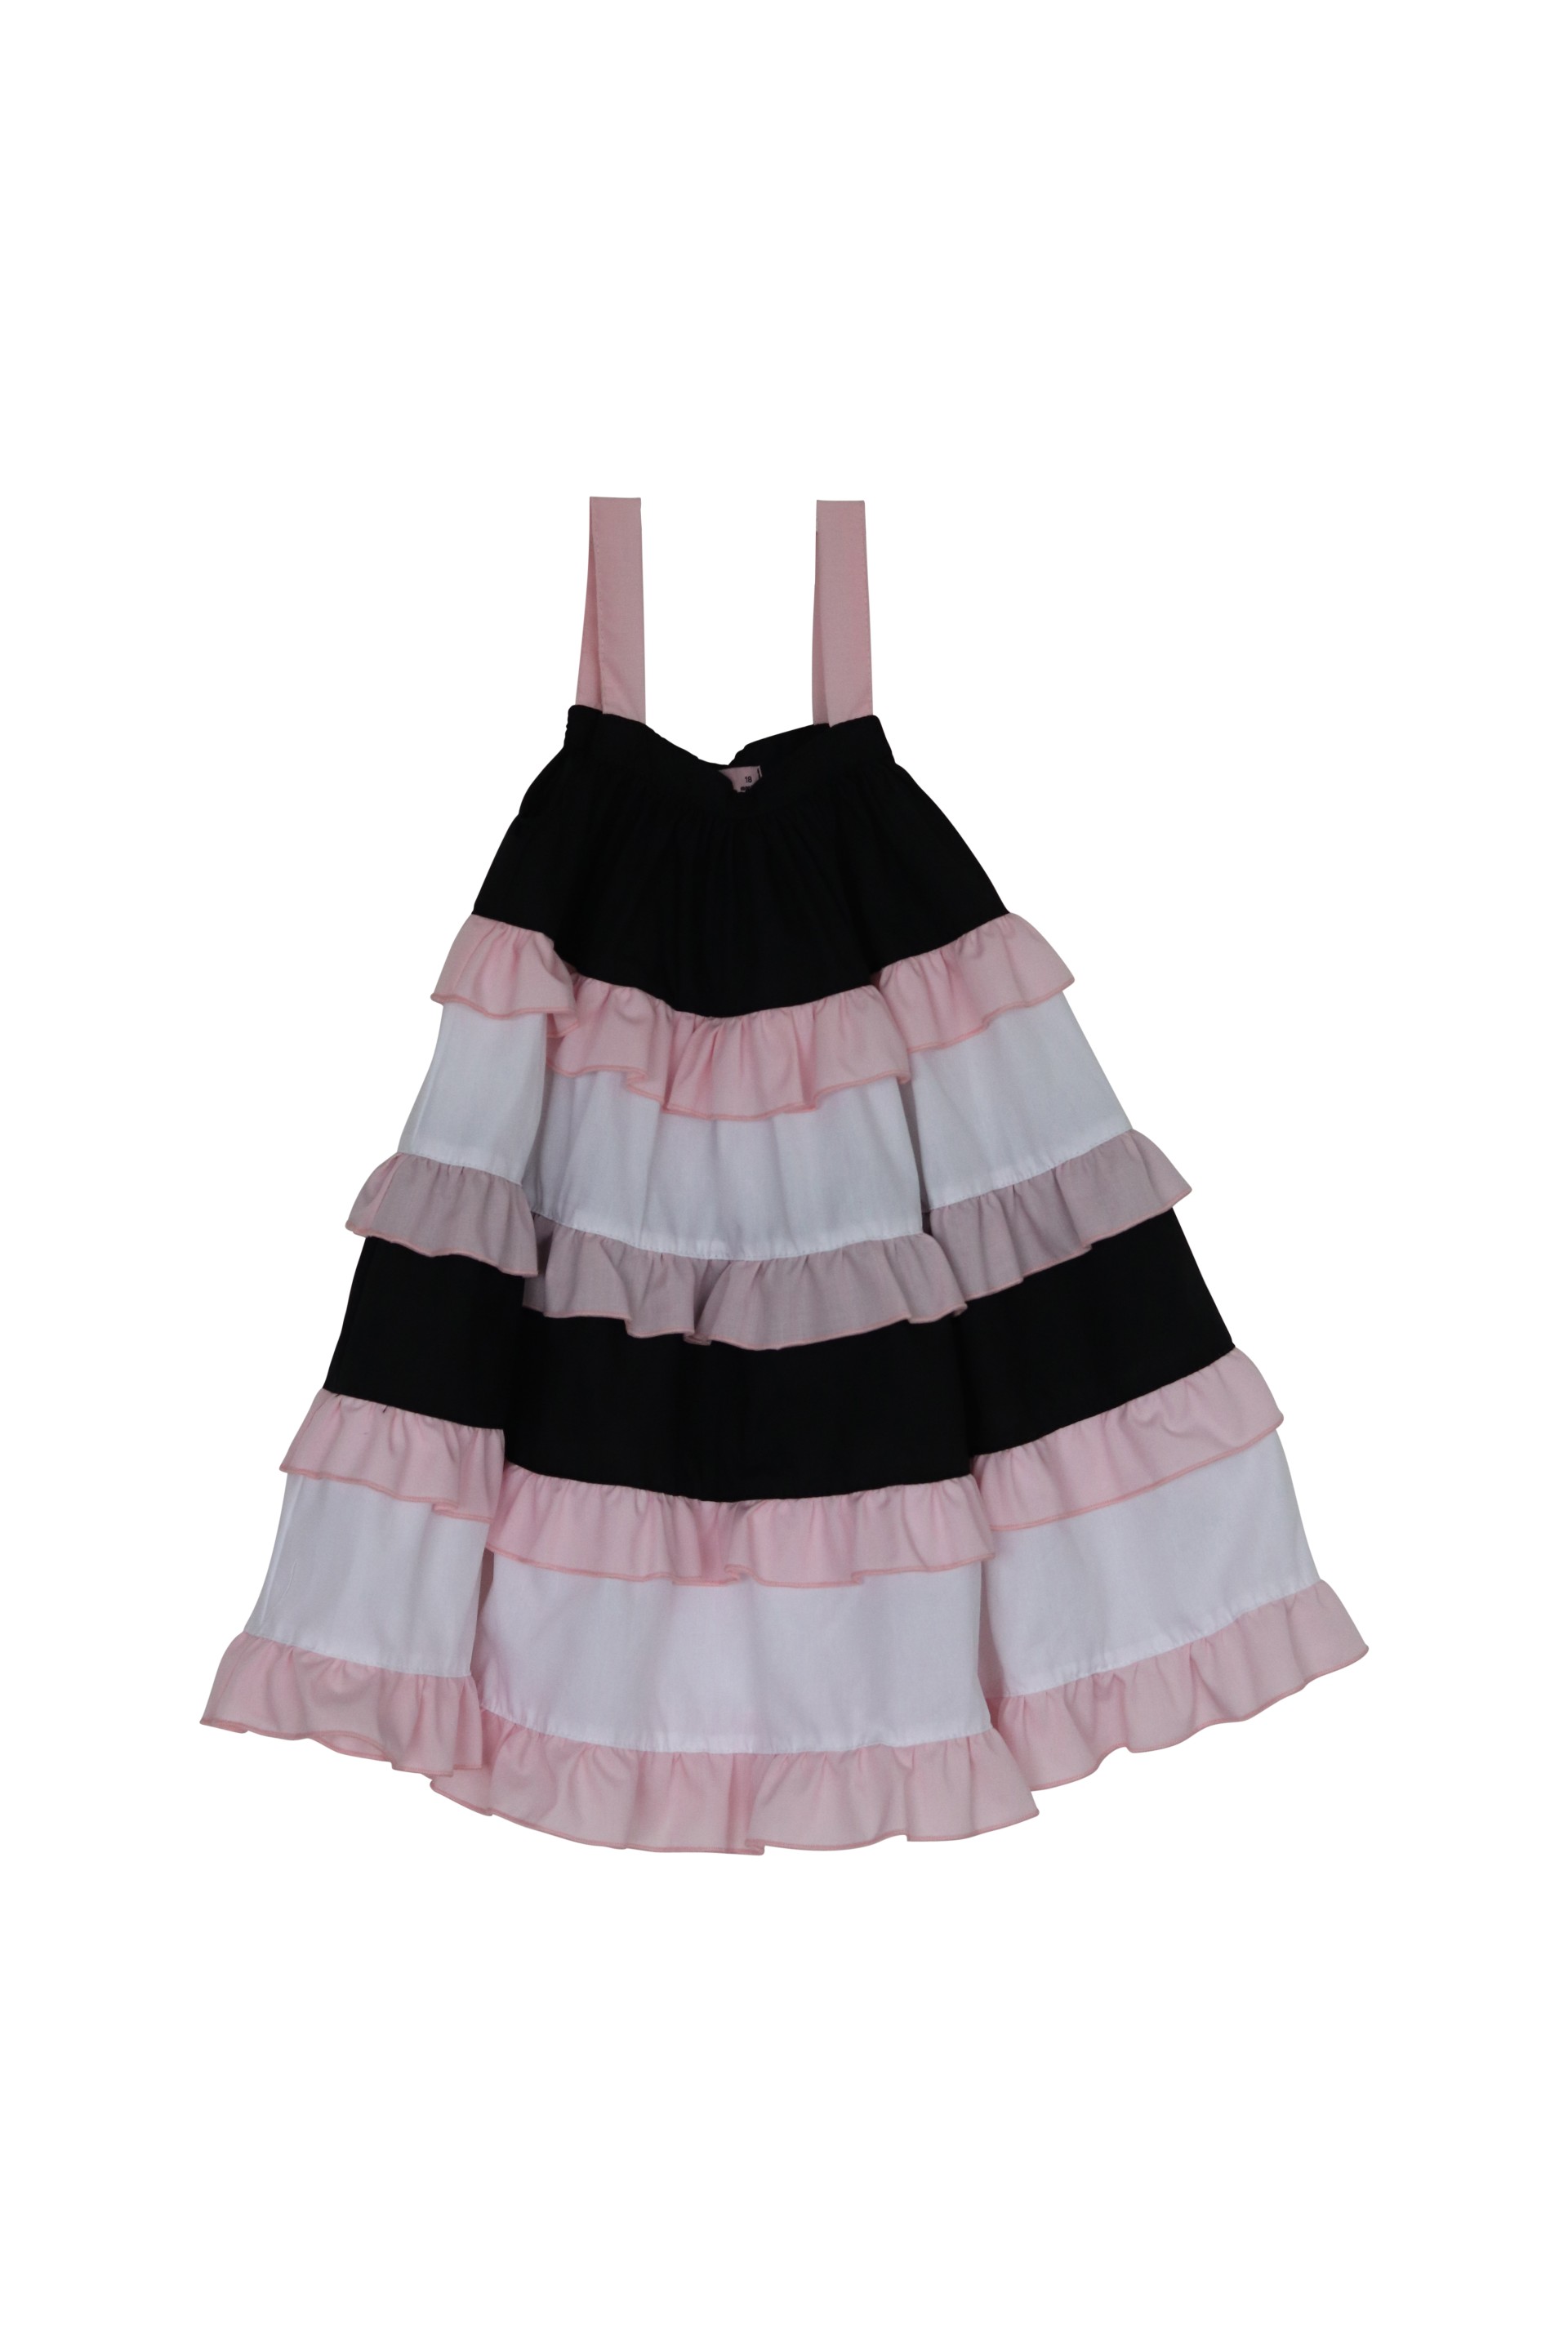 Pink white and black frill dress